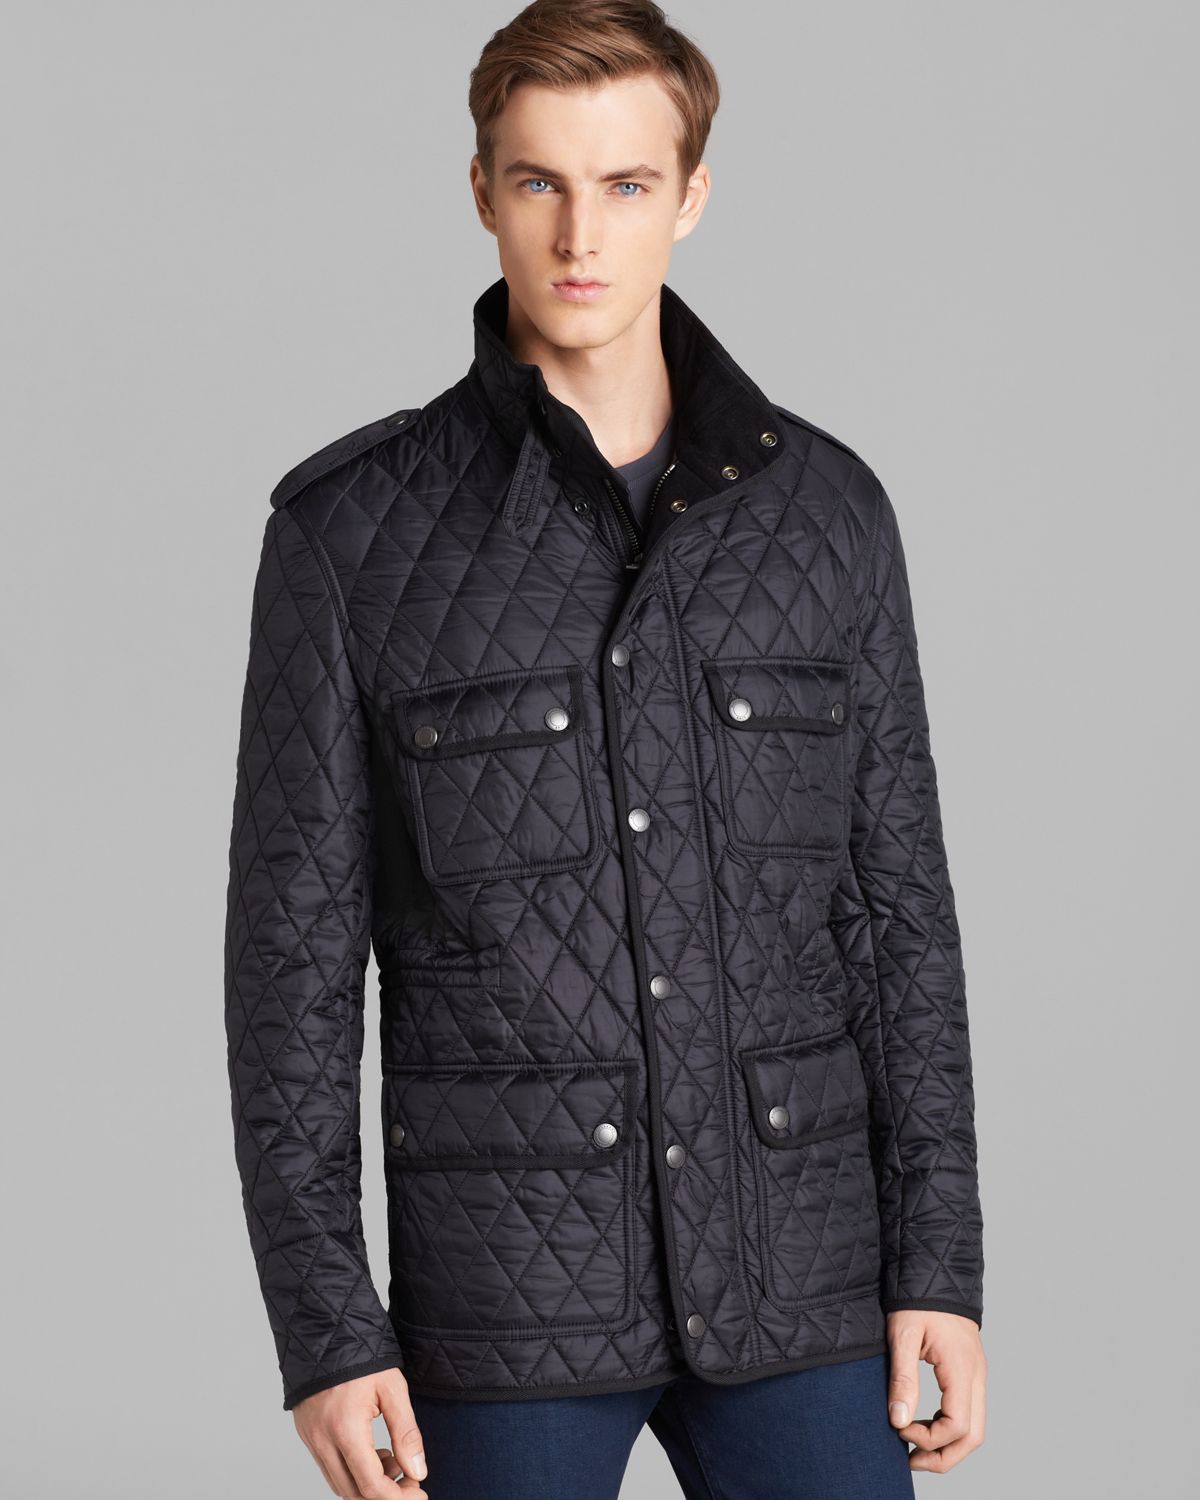 Burberry Brit Russel Diamond Quilted Jacket in Black for Men - Lyst